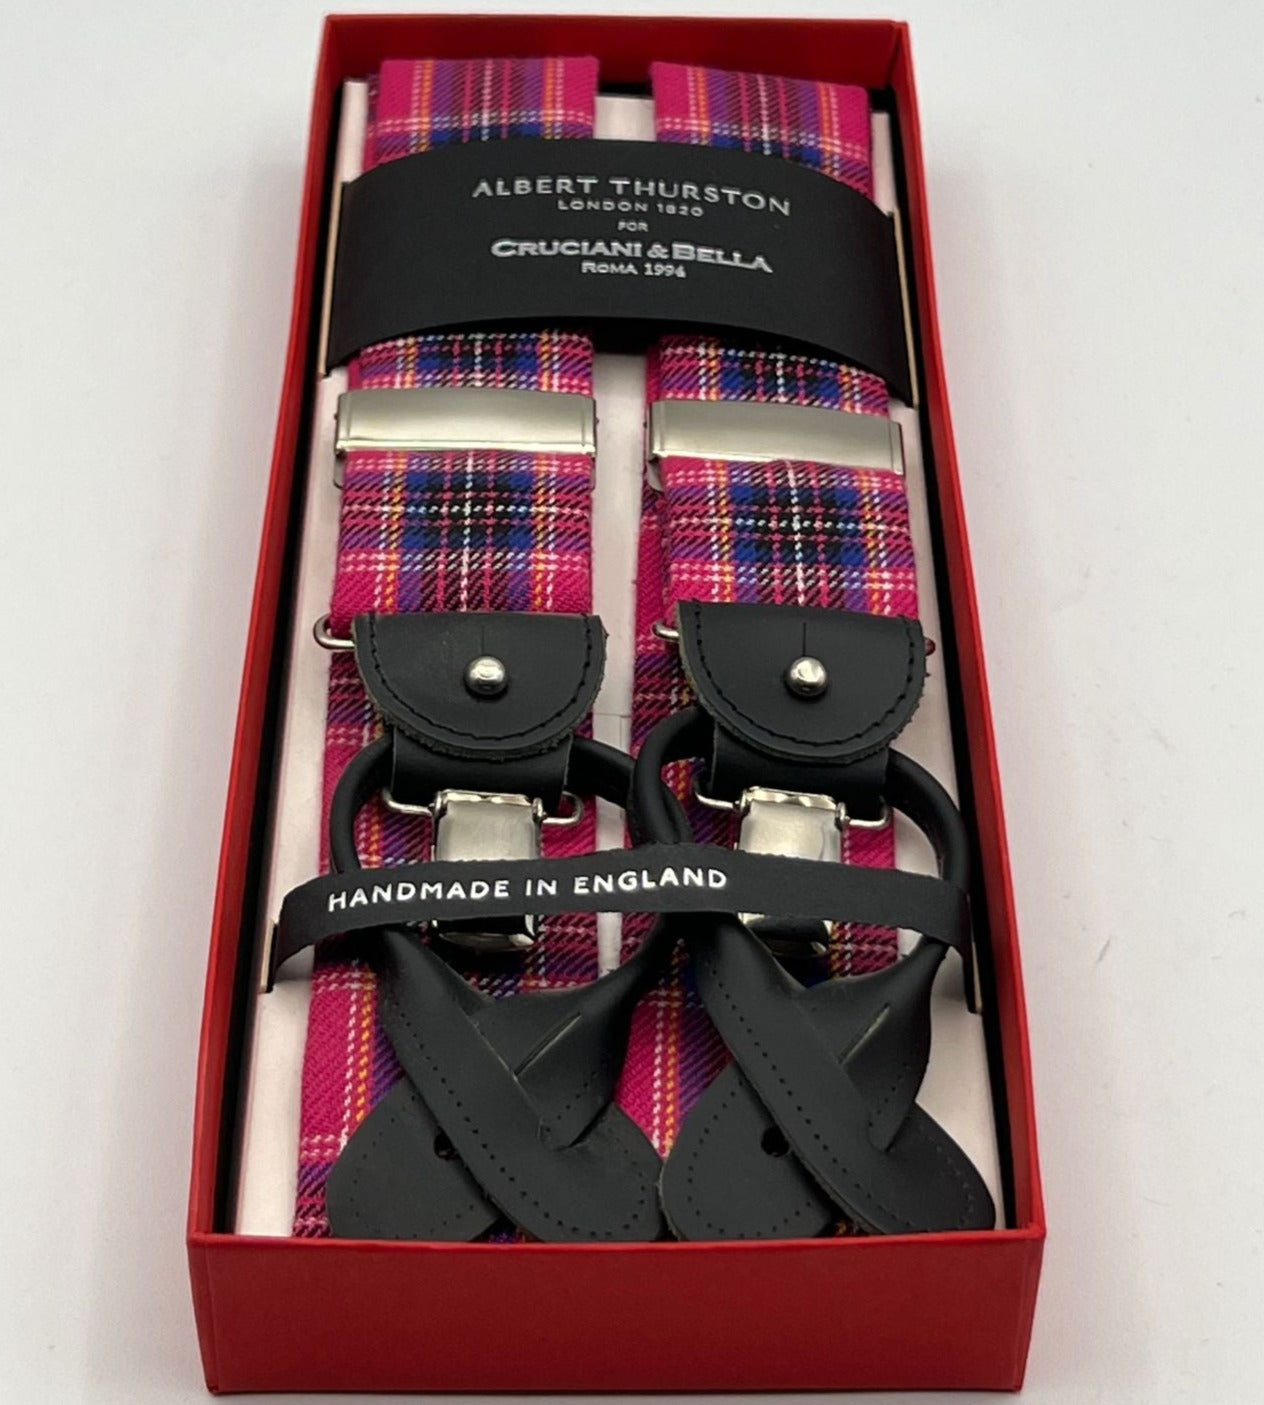 Albert Thurston for Cruciani & Bella Made in England 2 in 1 Adjustable Sizing 25 mm wool braces Pink tartan Y-Shaped Nickel Fittings Size: XL #3699